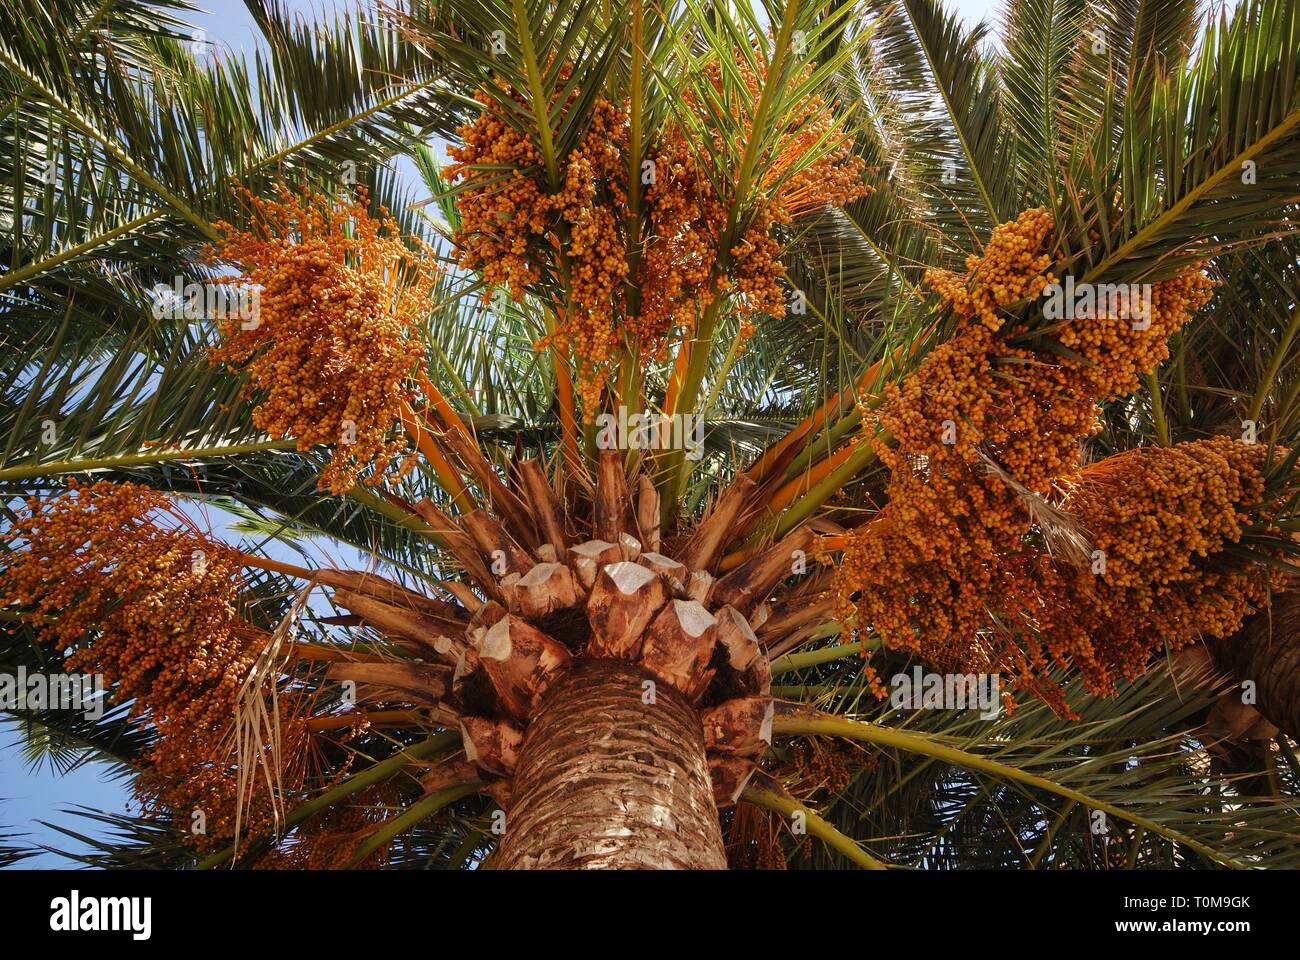 Palm tree laden with dates, Lagos, Malaga Province, Andalusia, Spain, Western Europe. Stock Photo